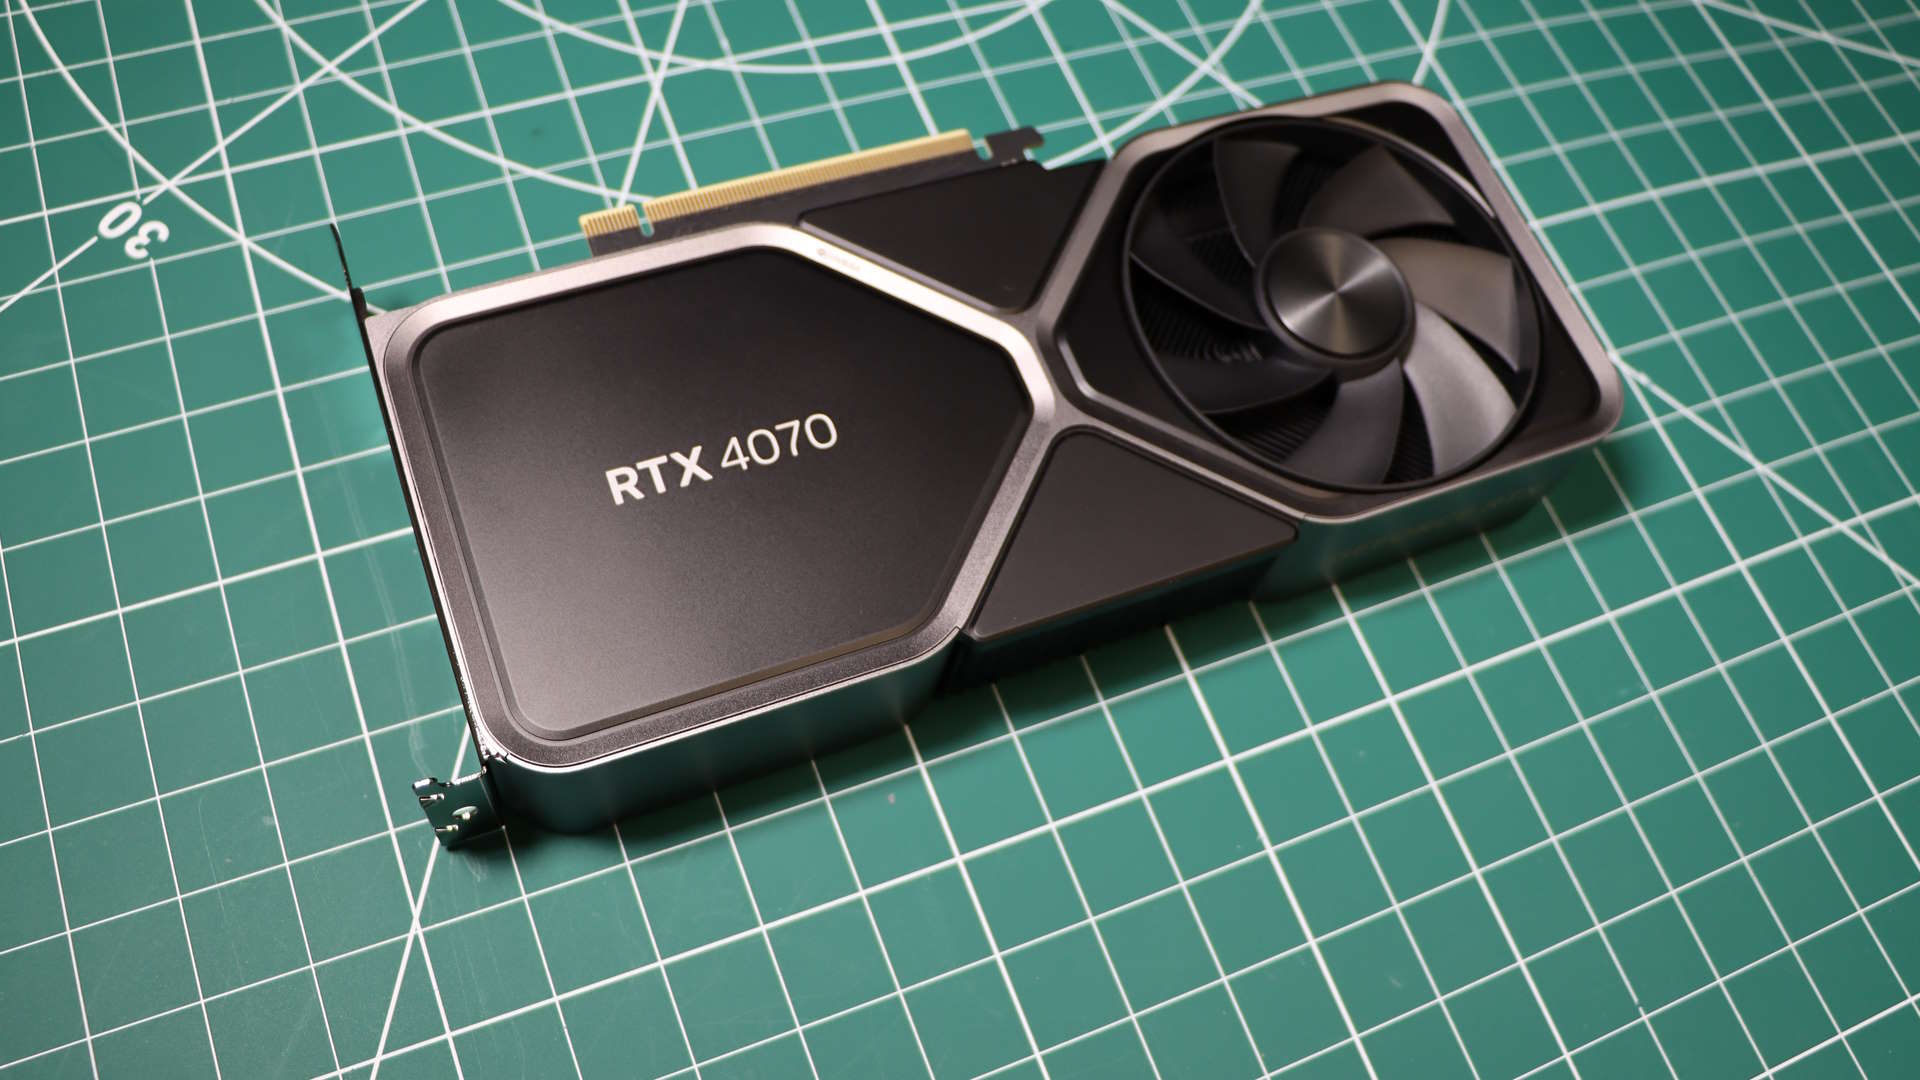 NVIDIA GeForce RTX 4070 SUPER Rumored To Get AD103 GPU & 16 GB VRAM,  Non-GDDR6X RTX 4070 Also In The Works